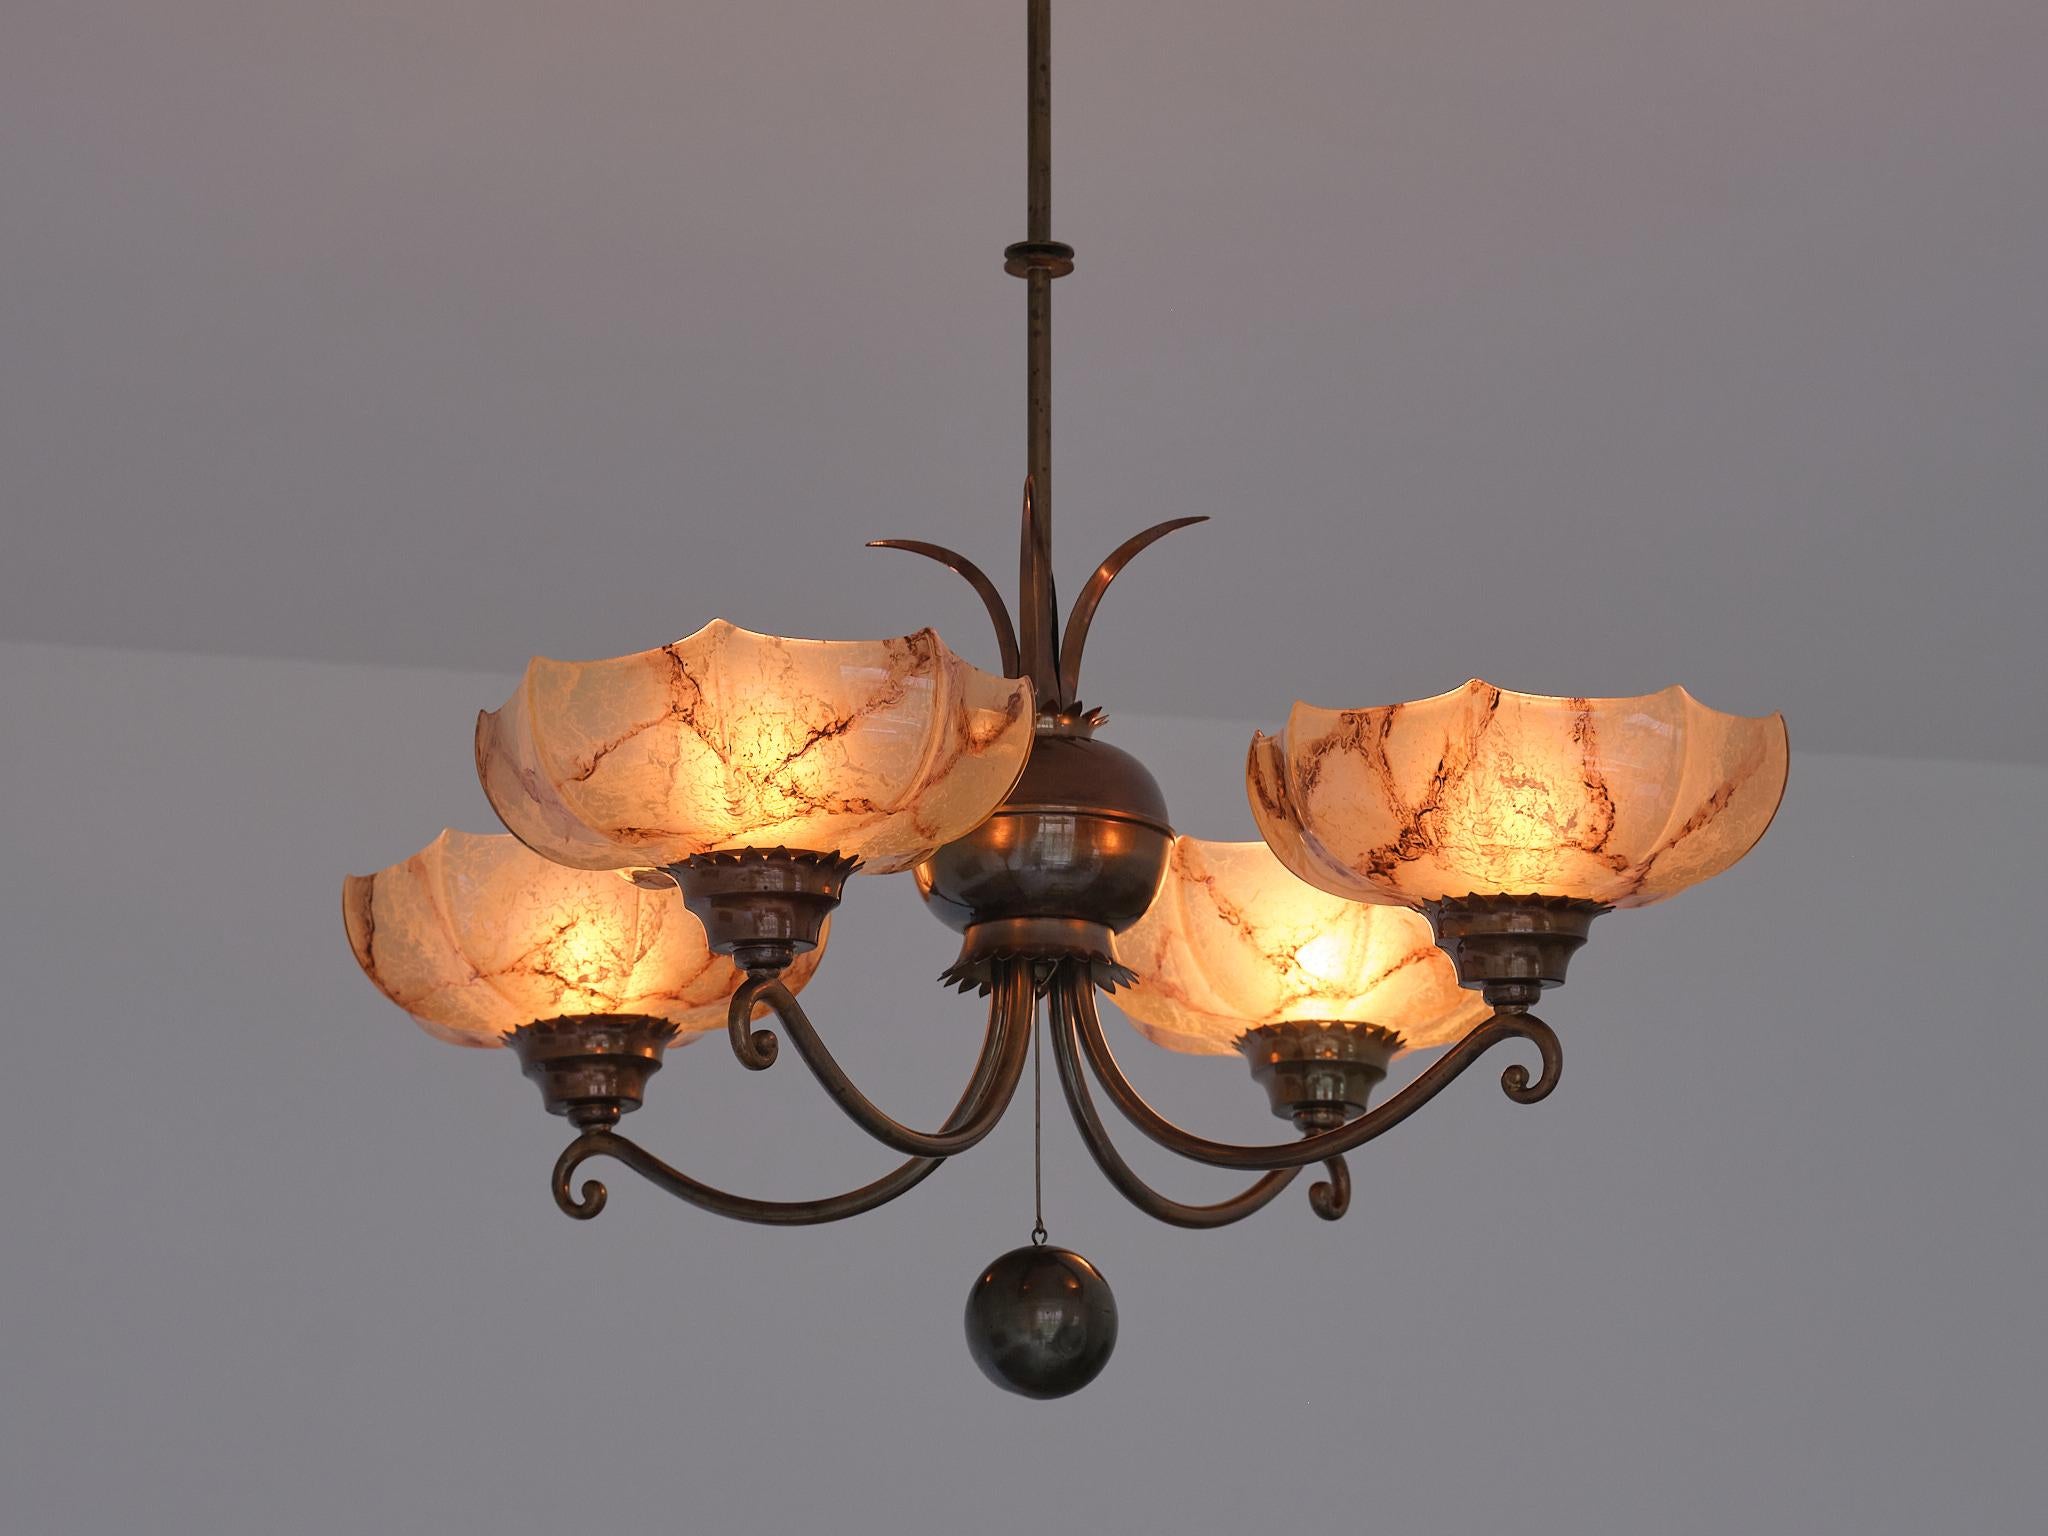 Harald Notini Chandelier in Brass and Marbled Glass, Böhlmarks, Sweden, 1927 For Sale 8